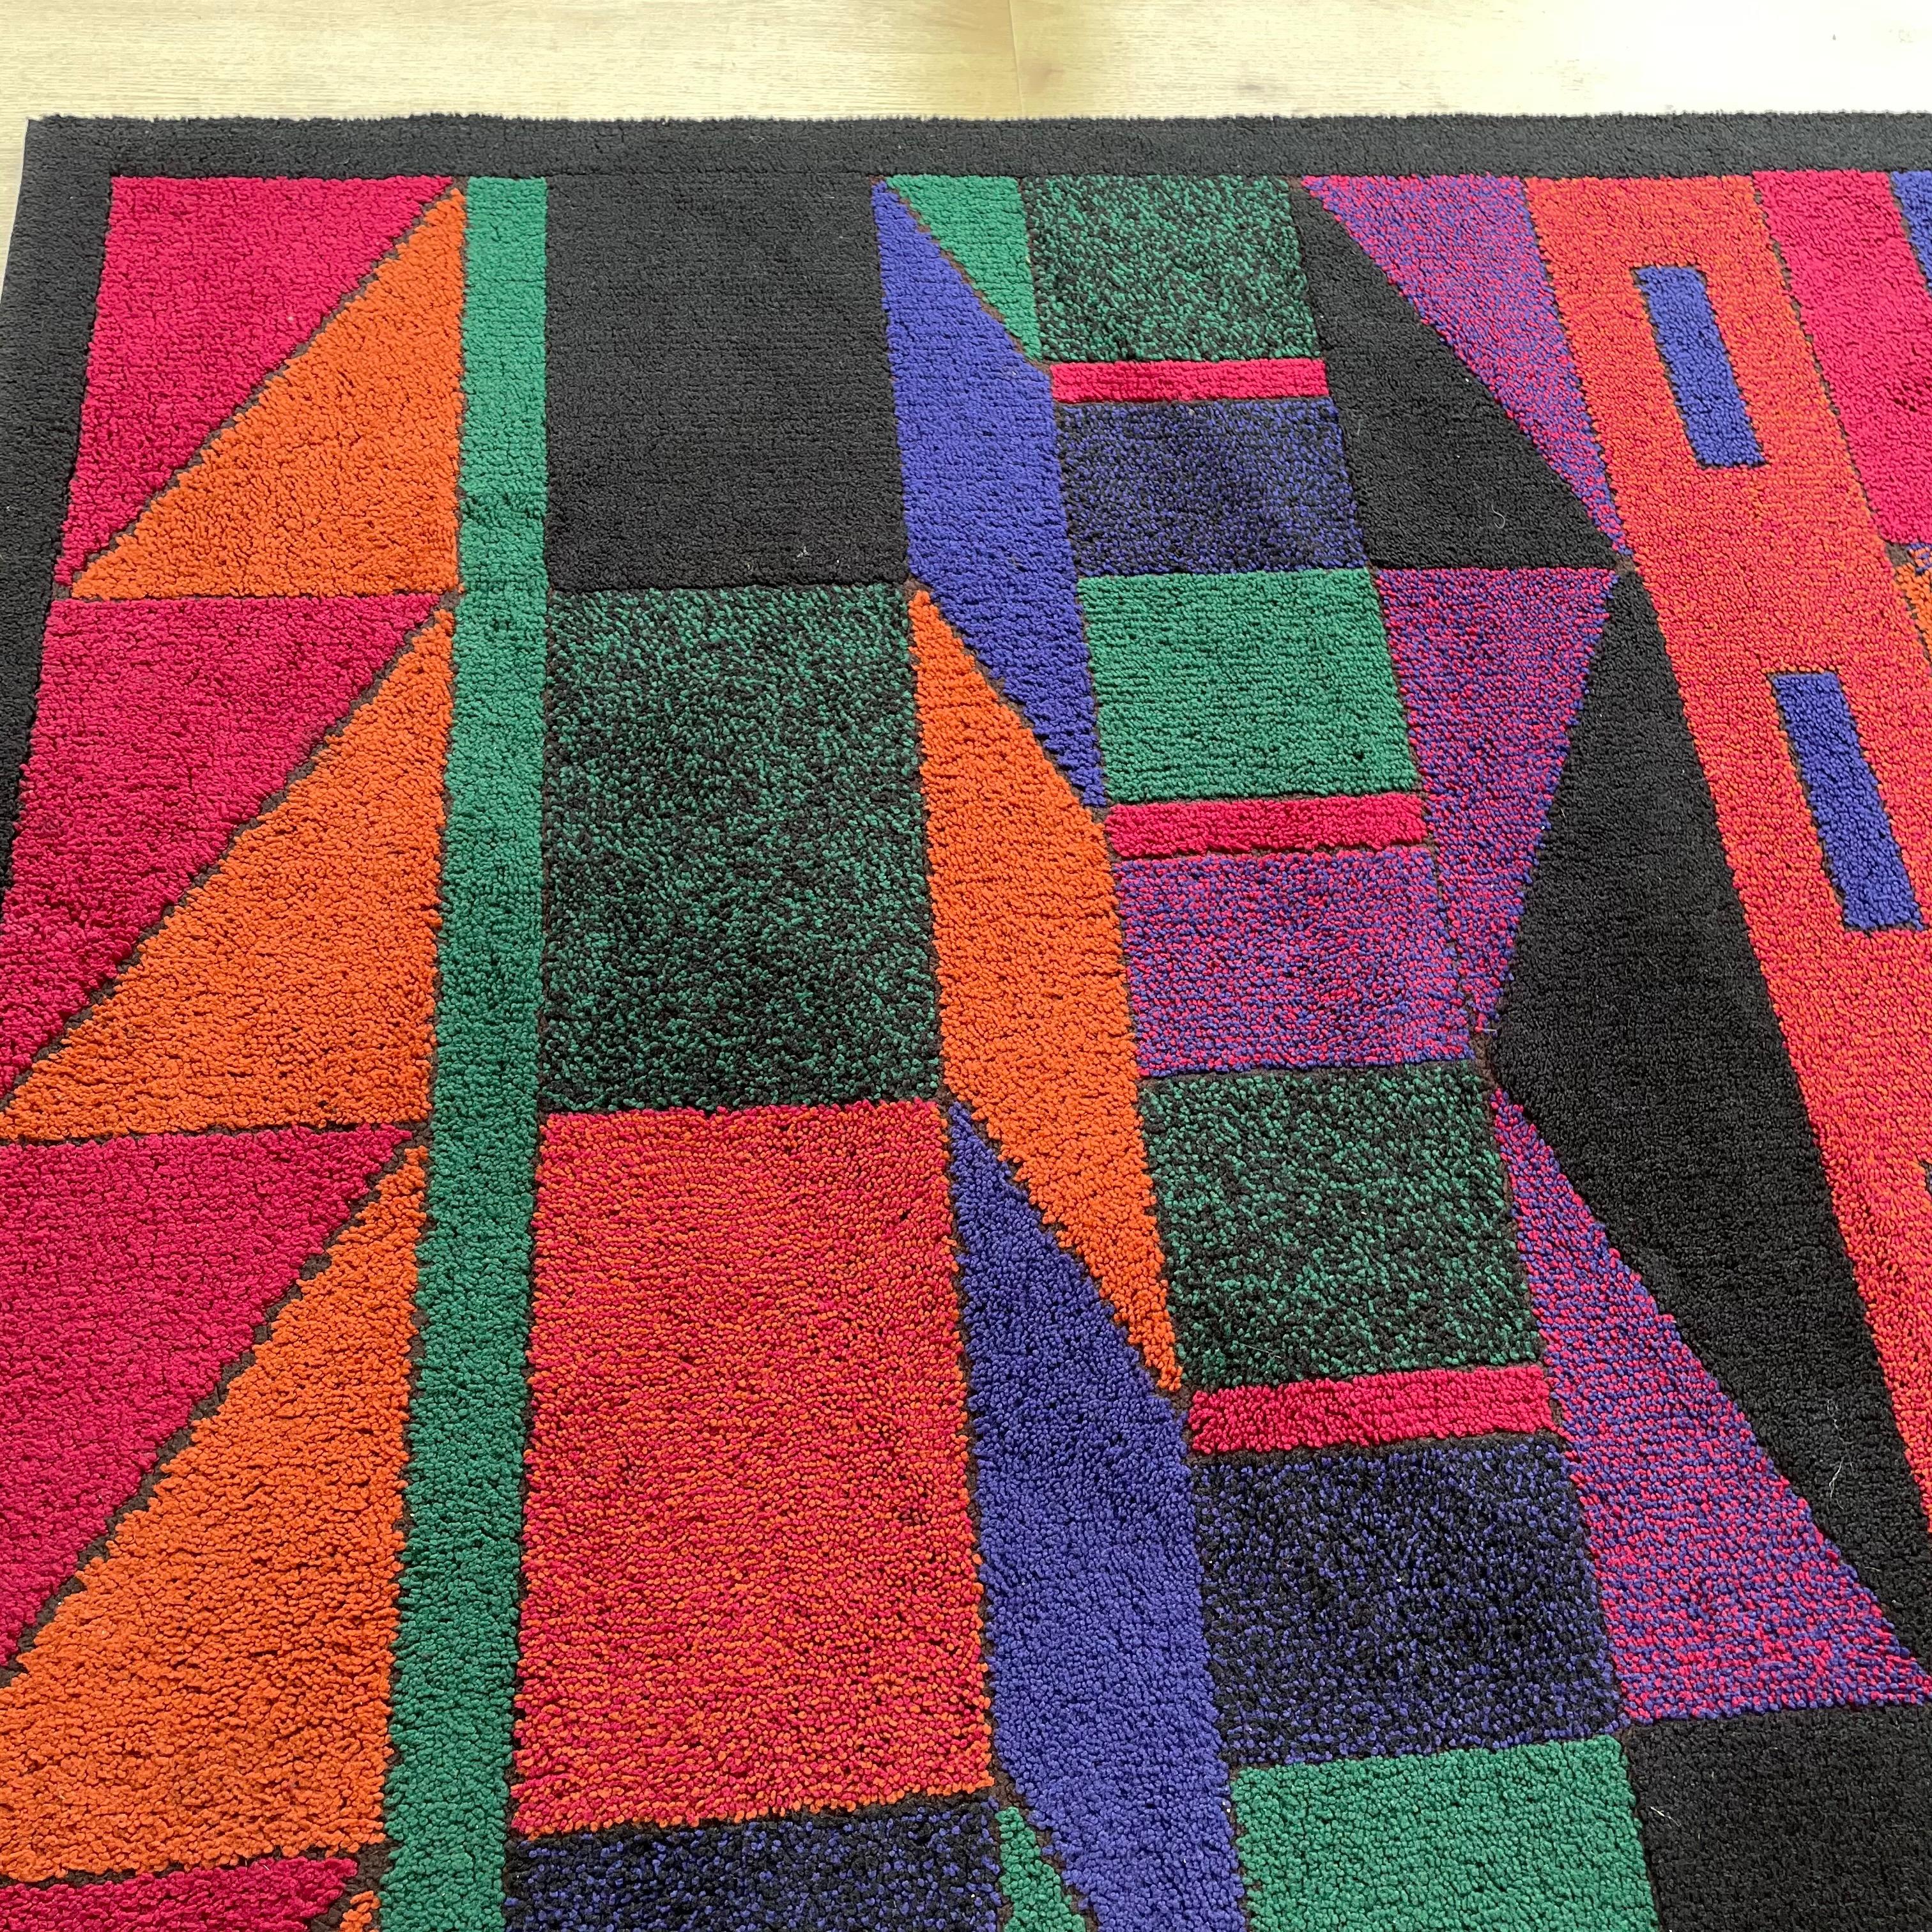 Psychedelic Memphis Style abstract Rug Carpet by Atrium Tefzet, Germany 1980s For Sale 4